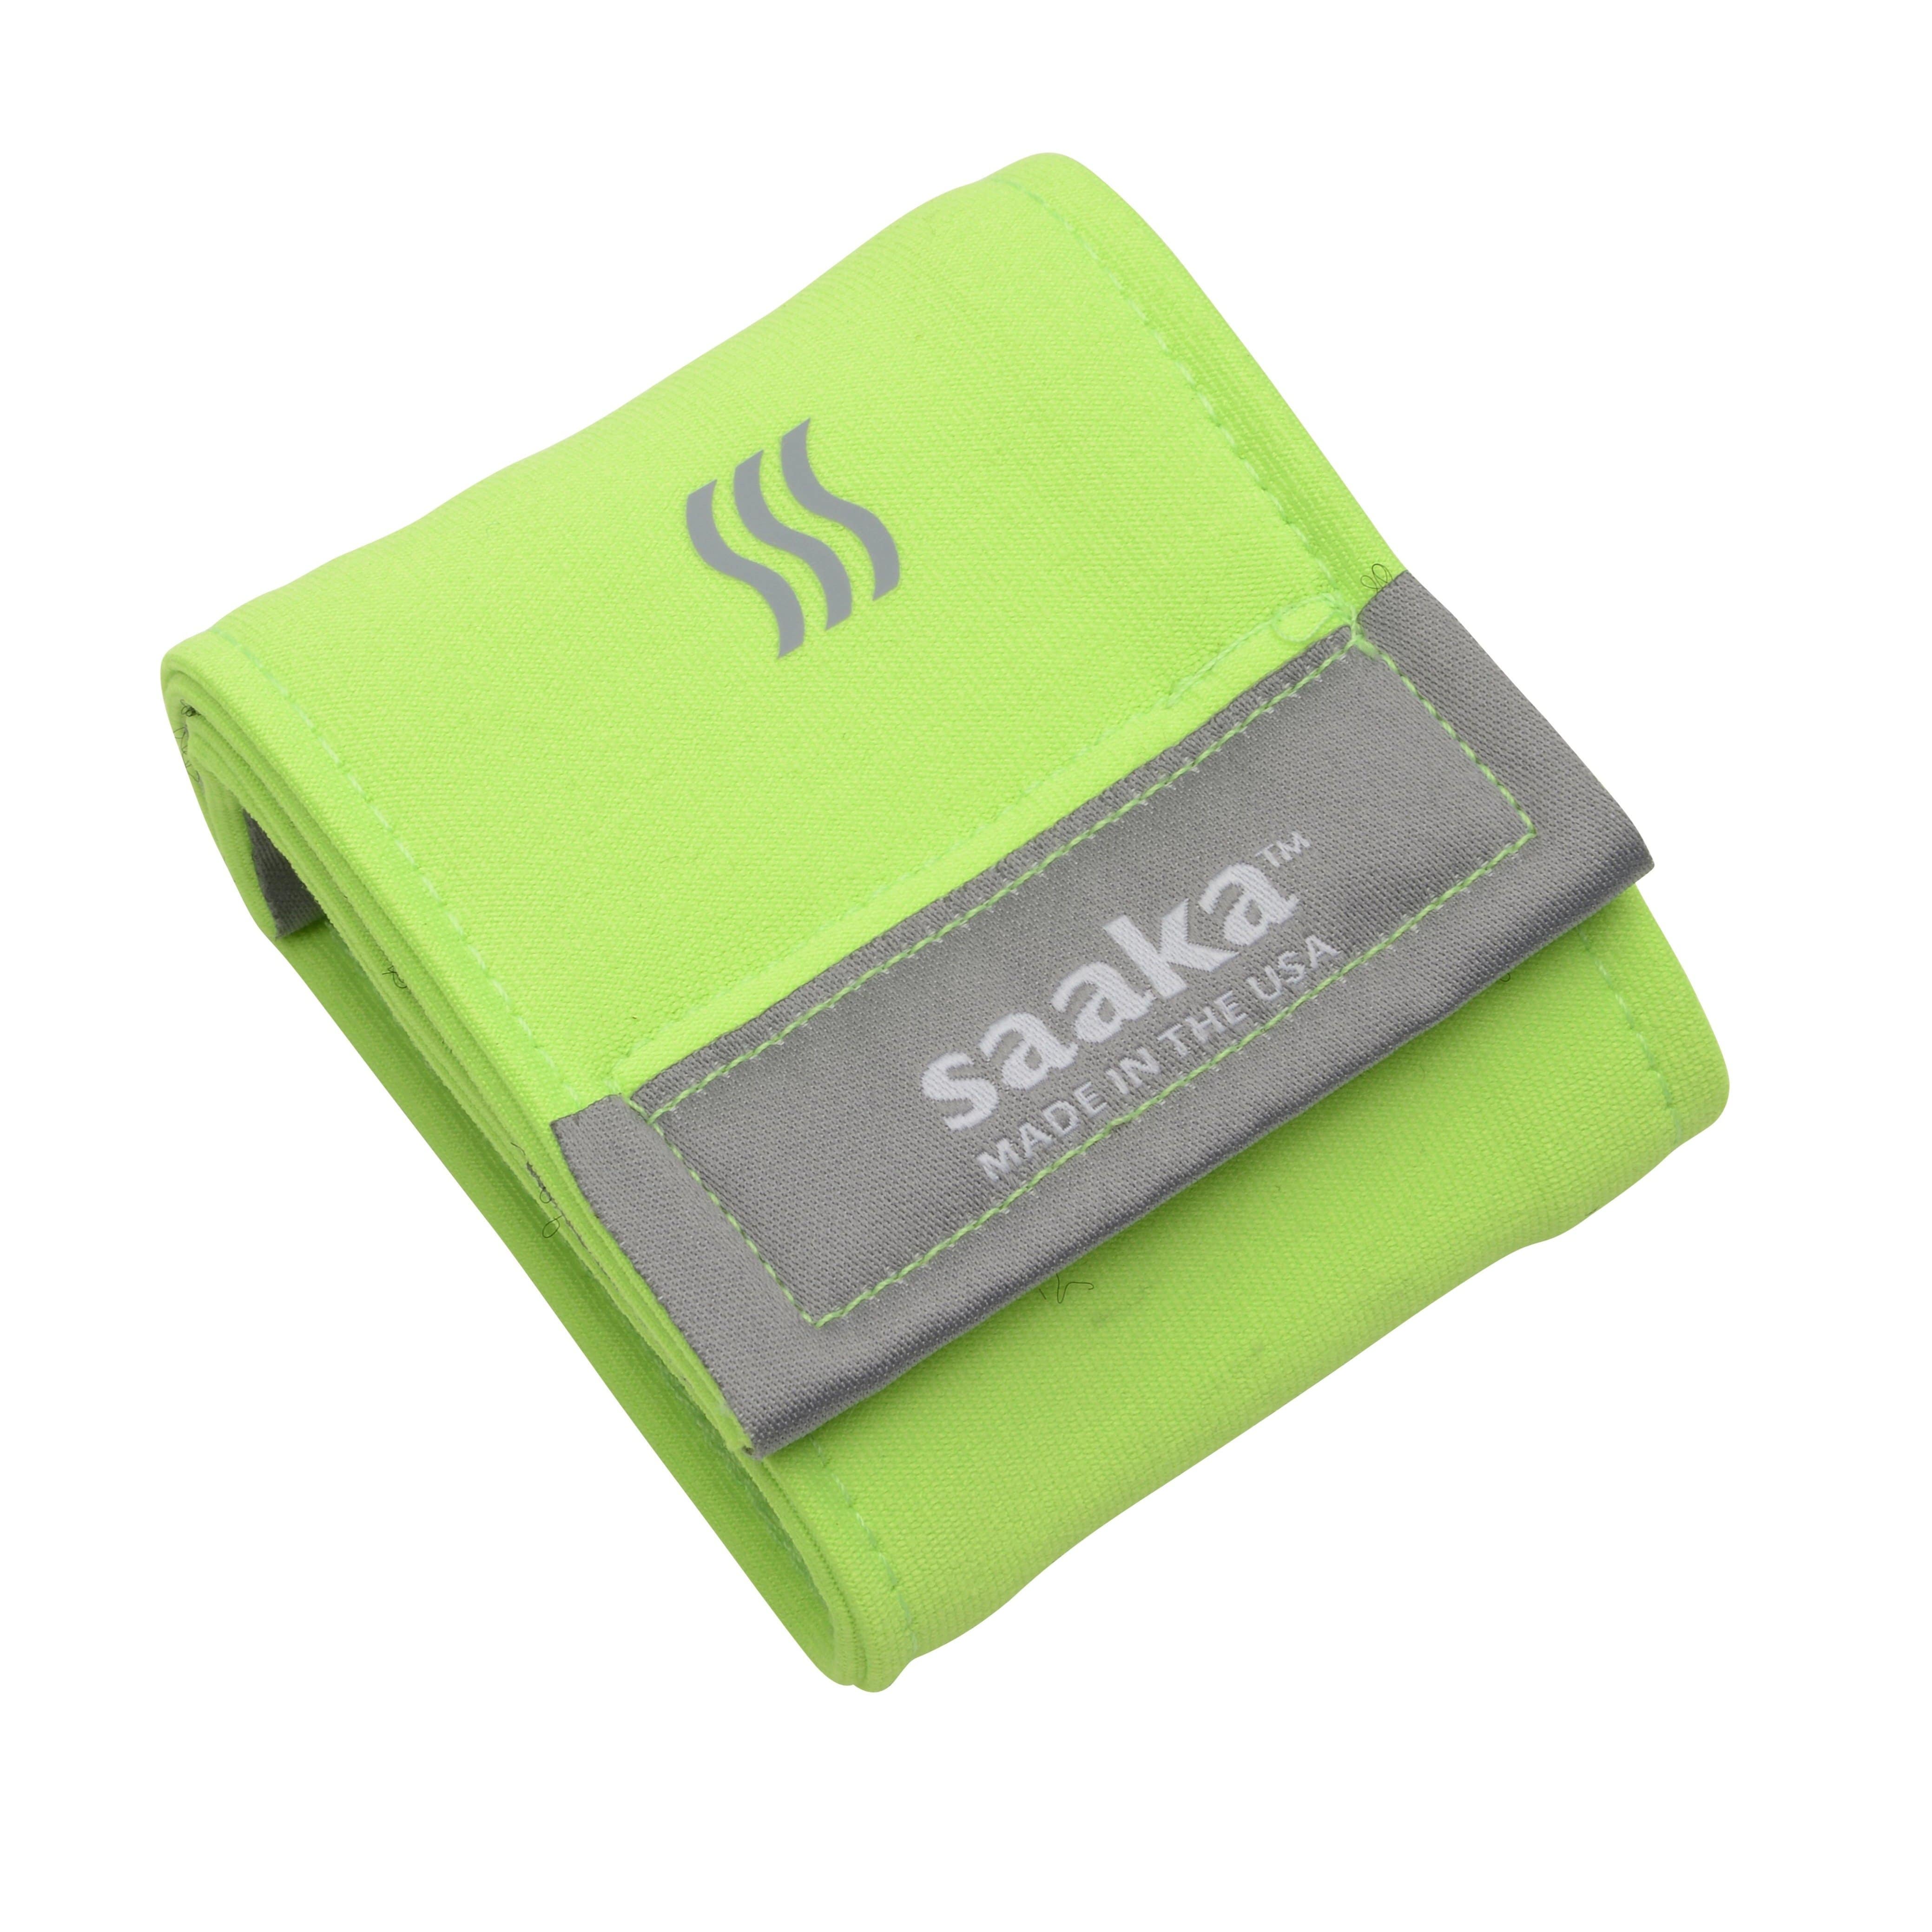 Product photo of a neon green athletic wristband that helps with sweat and moisture.